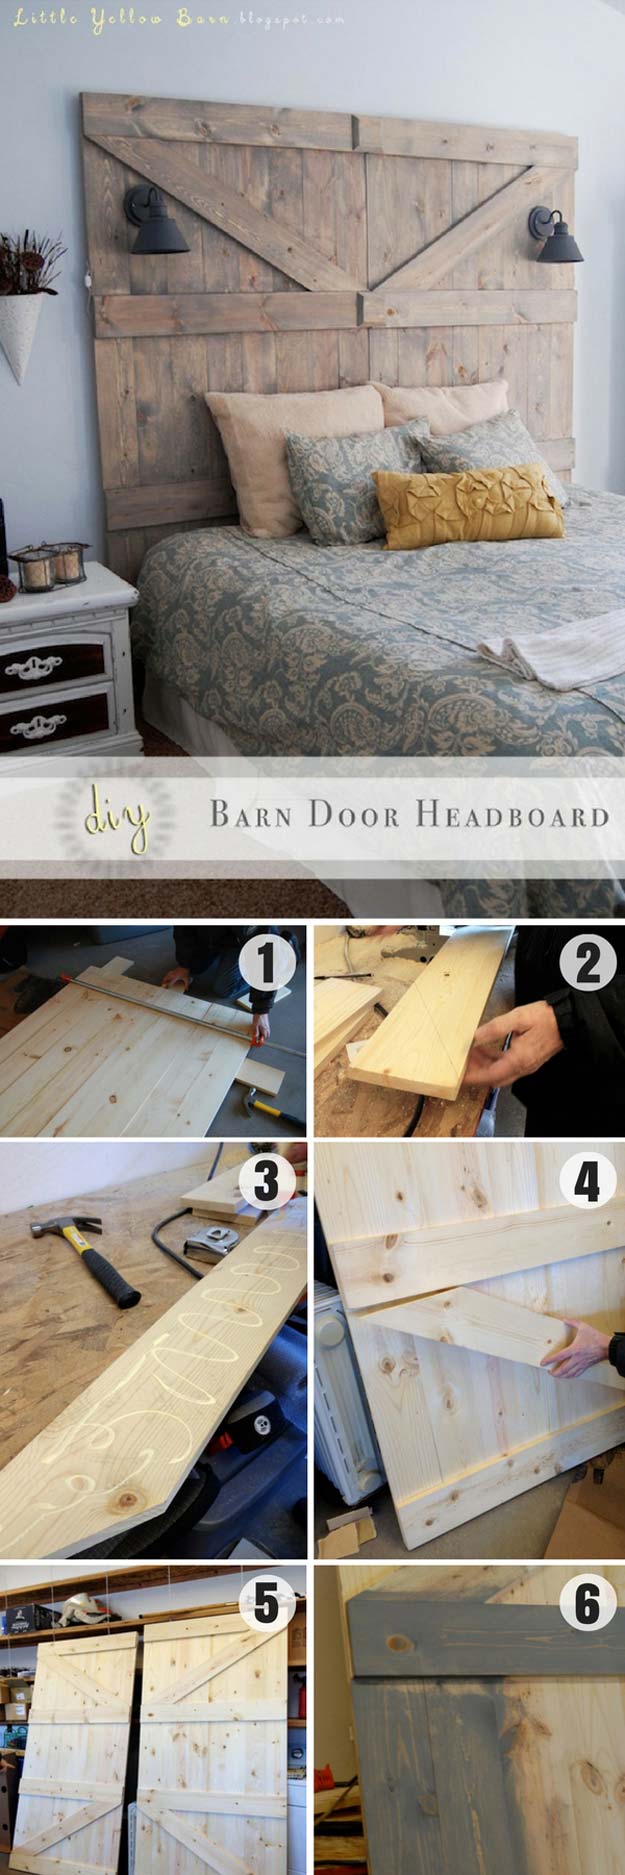 Cool DIY Ideas for Your Bed - DIY Barn Door Headboard - Fun Bedding, Pillows, Blankets, Home Decor and Crafts to Make Your Bedroom Awesome - Easy Step by Step Tutorials for Making A T-Shirt Pillow, Knit Throws, Fuzzy and Furry Warm Blankets and Handmade DYI Bedding, Sheets, Bedskirts and Shams 